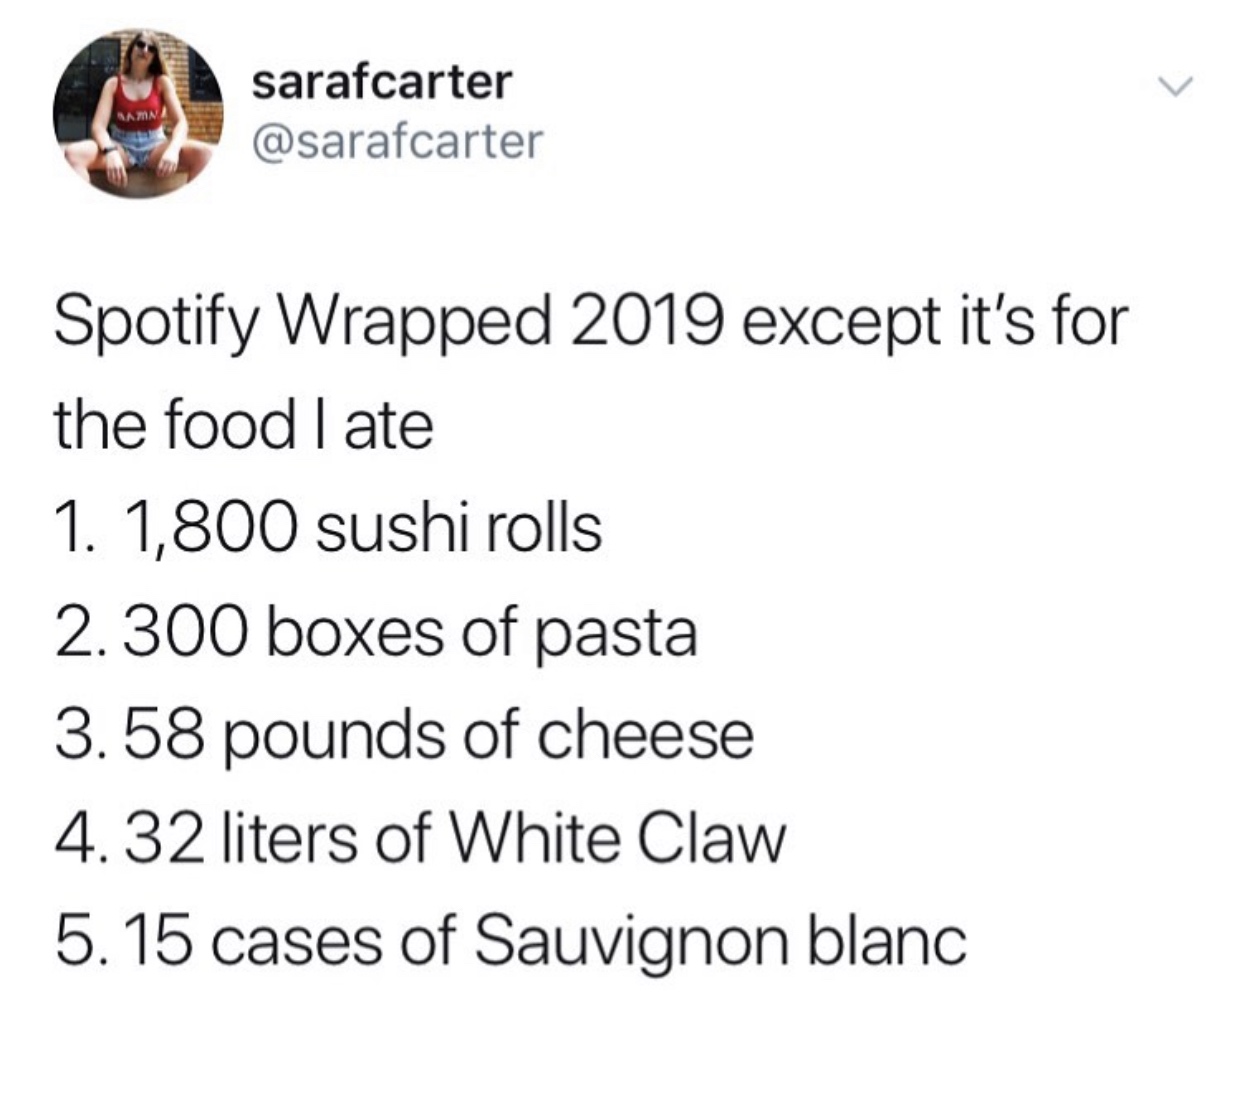 angle - sarafcarter Vama Spotify Wrapped 2019 except it's for the food late 1. 1,800 sushi rolls 2.300 boxes of pasta 3.58 pounds of cheese 4.32 liters of White Claw 5. 15 cases of Sauvignon blanc